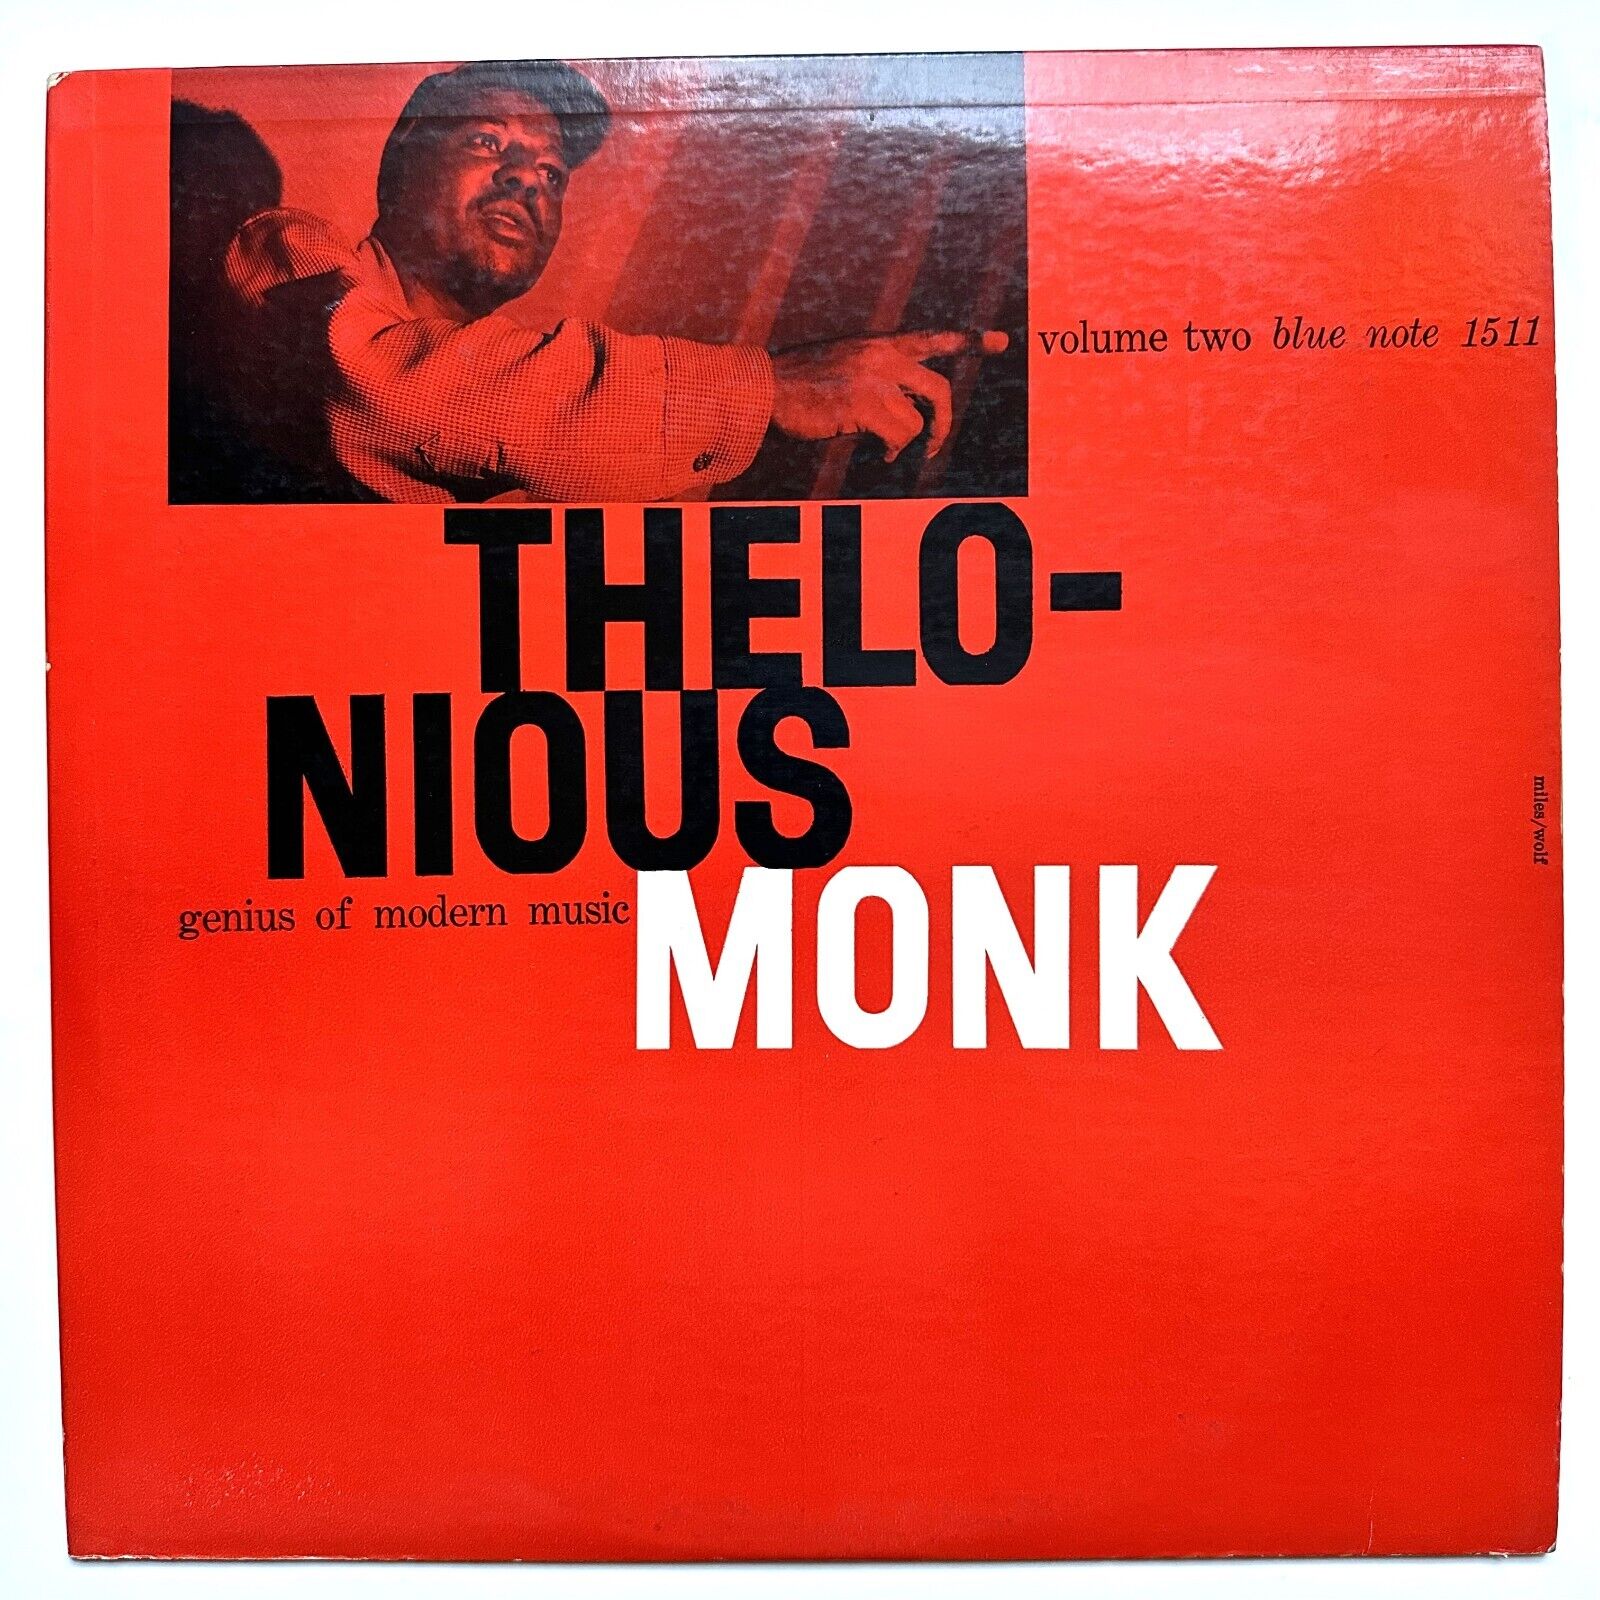 Pic 1 Thelonious Monk on Blue Note 1511